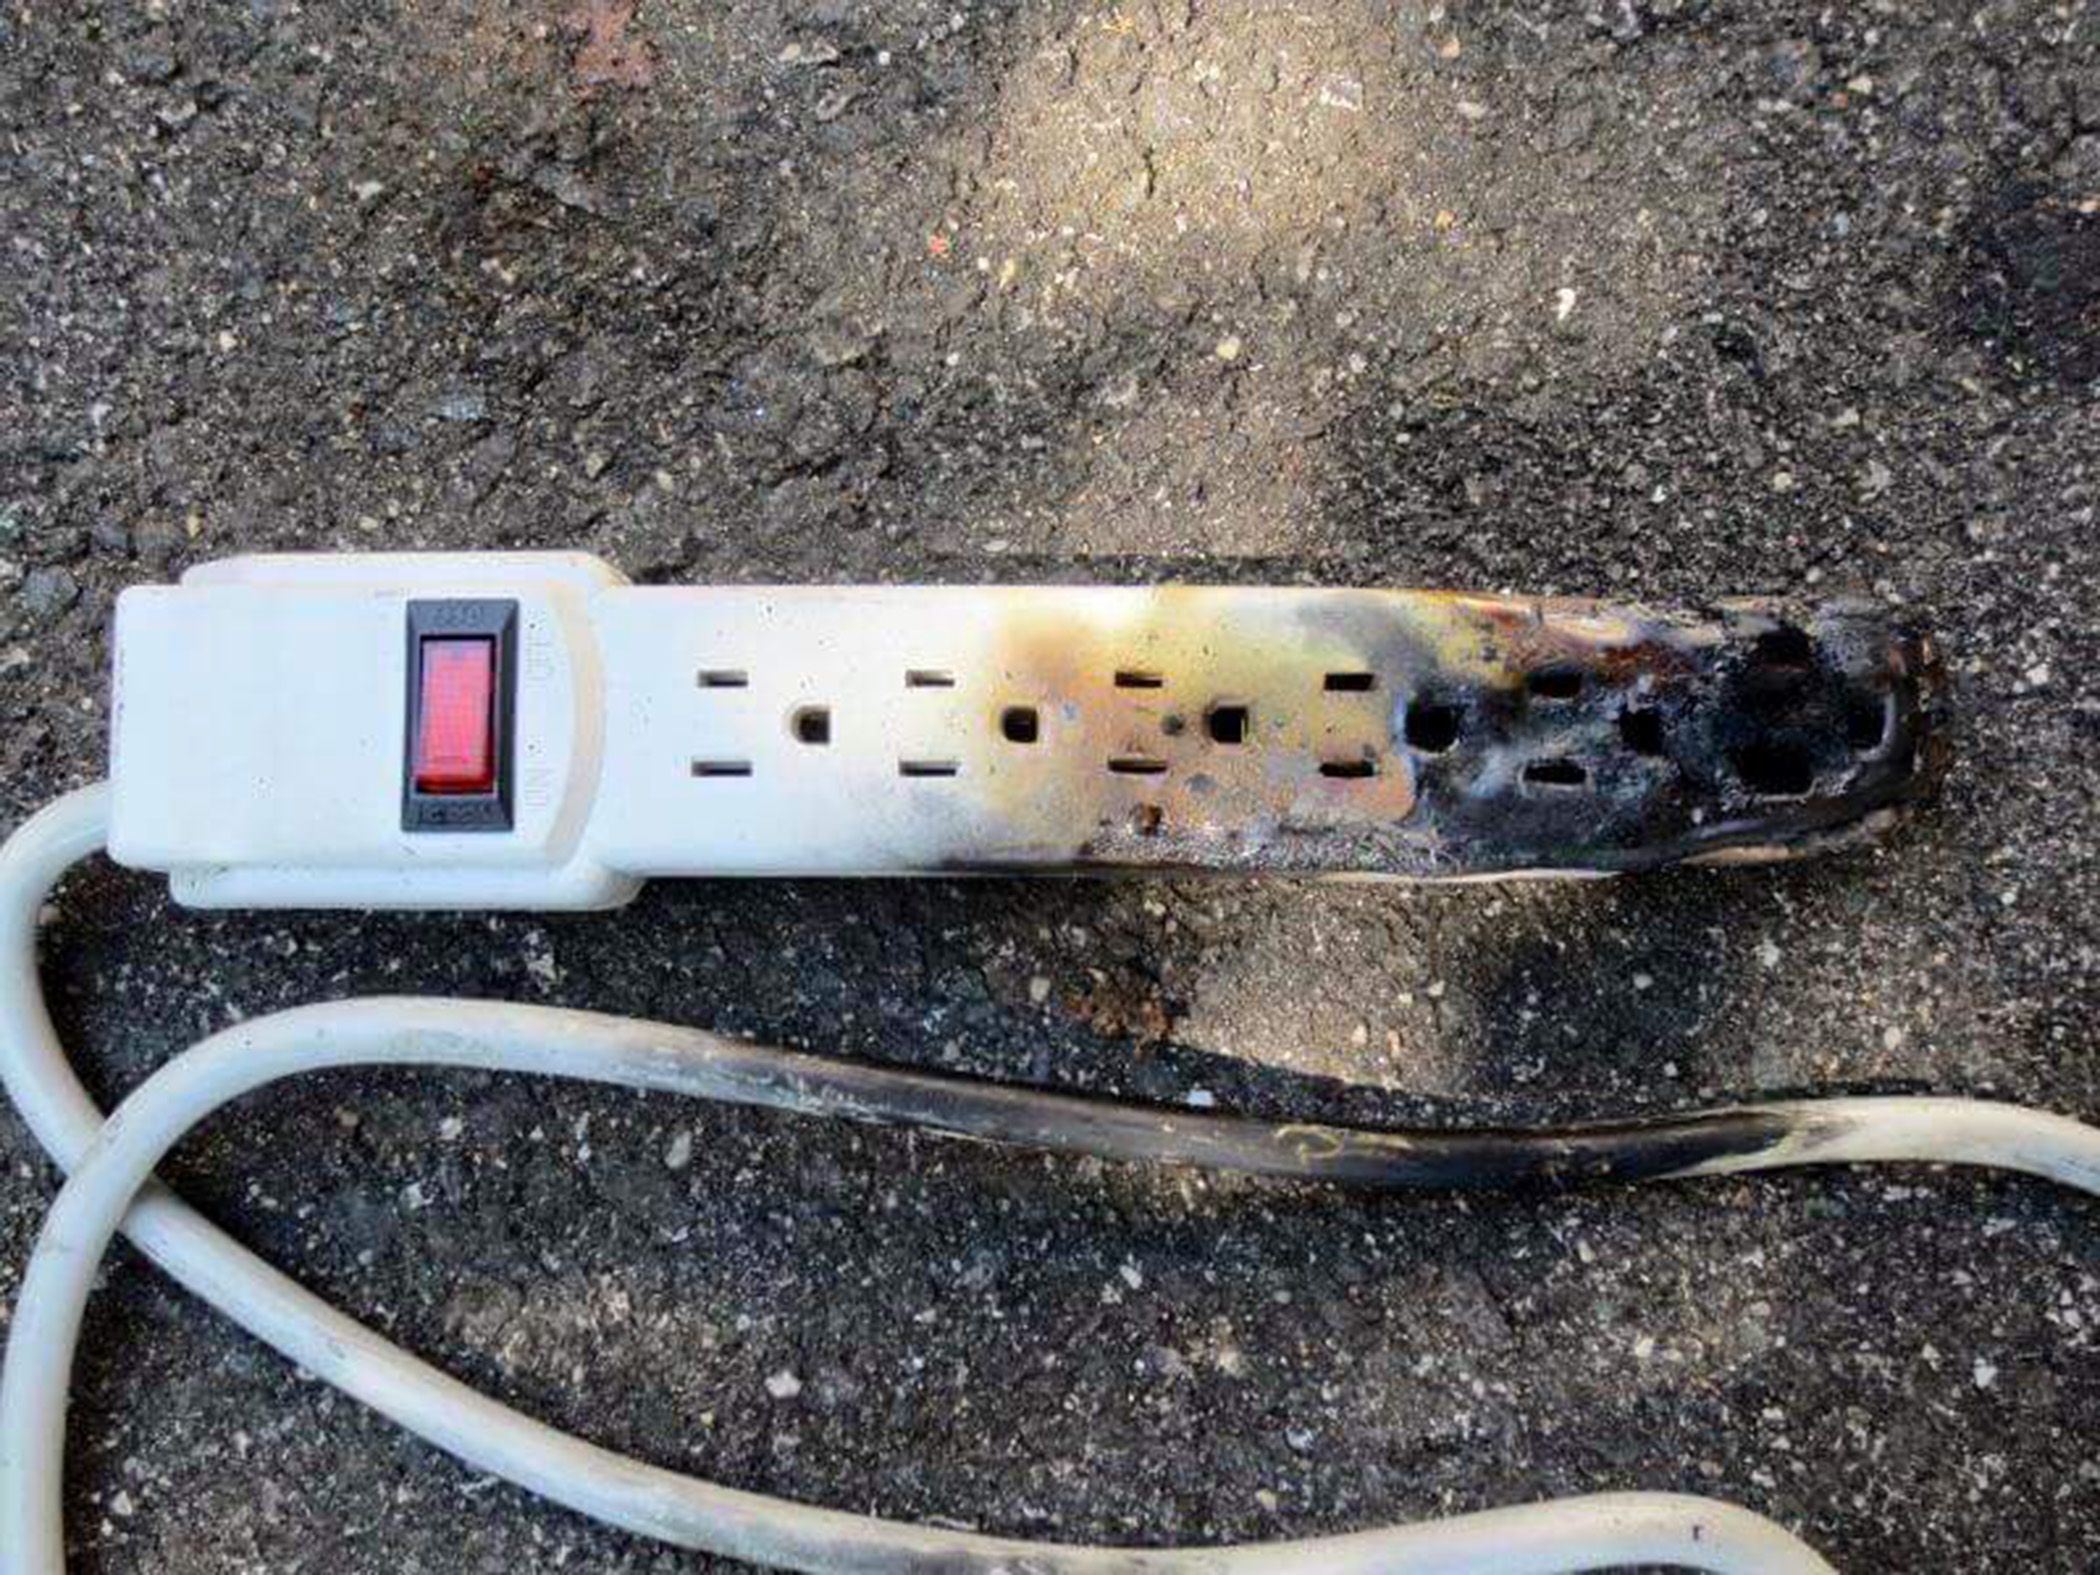 The B. reccomend Electrical power strip cover